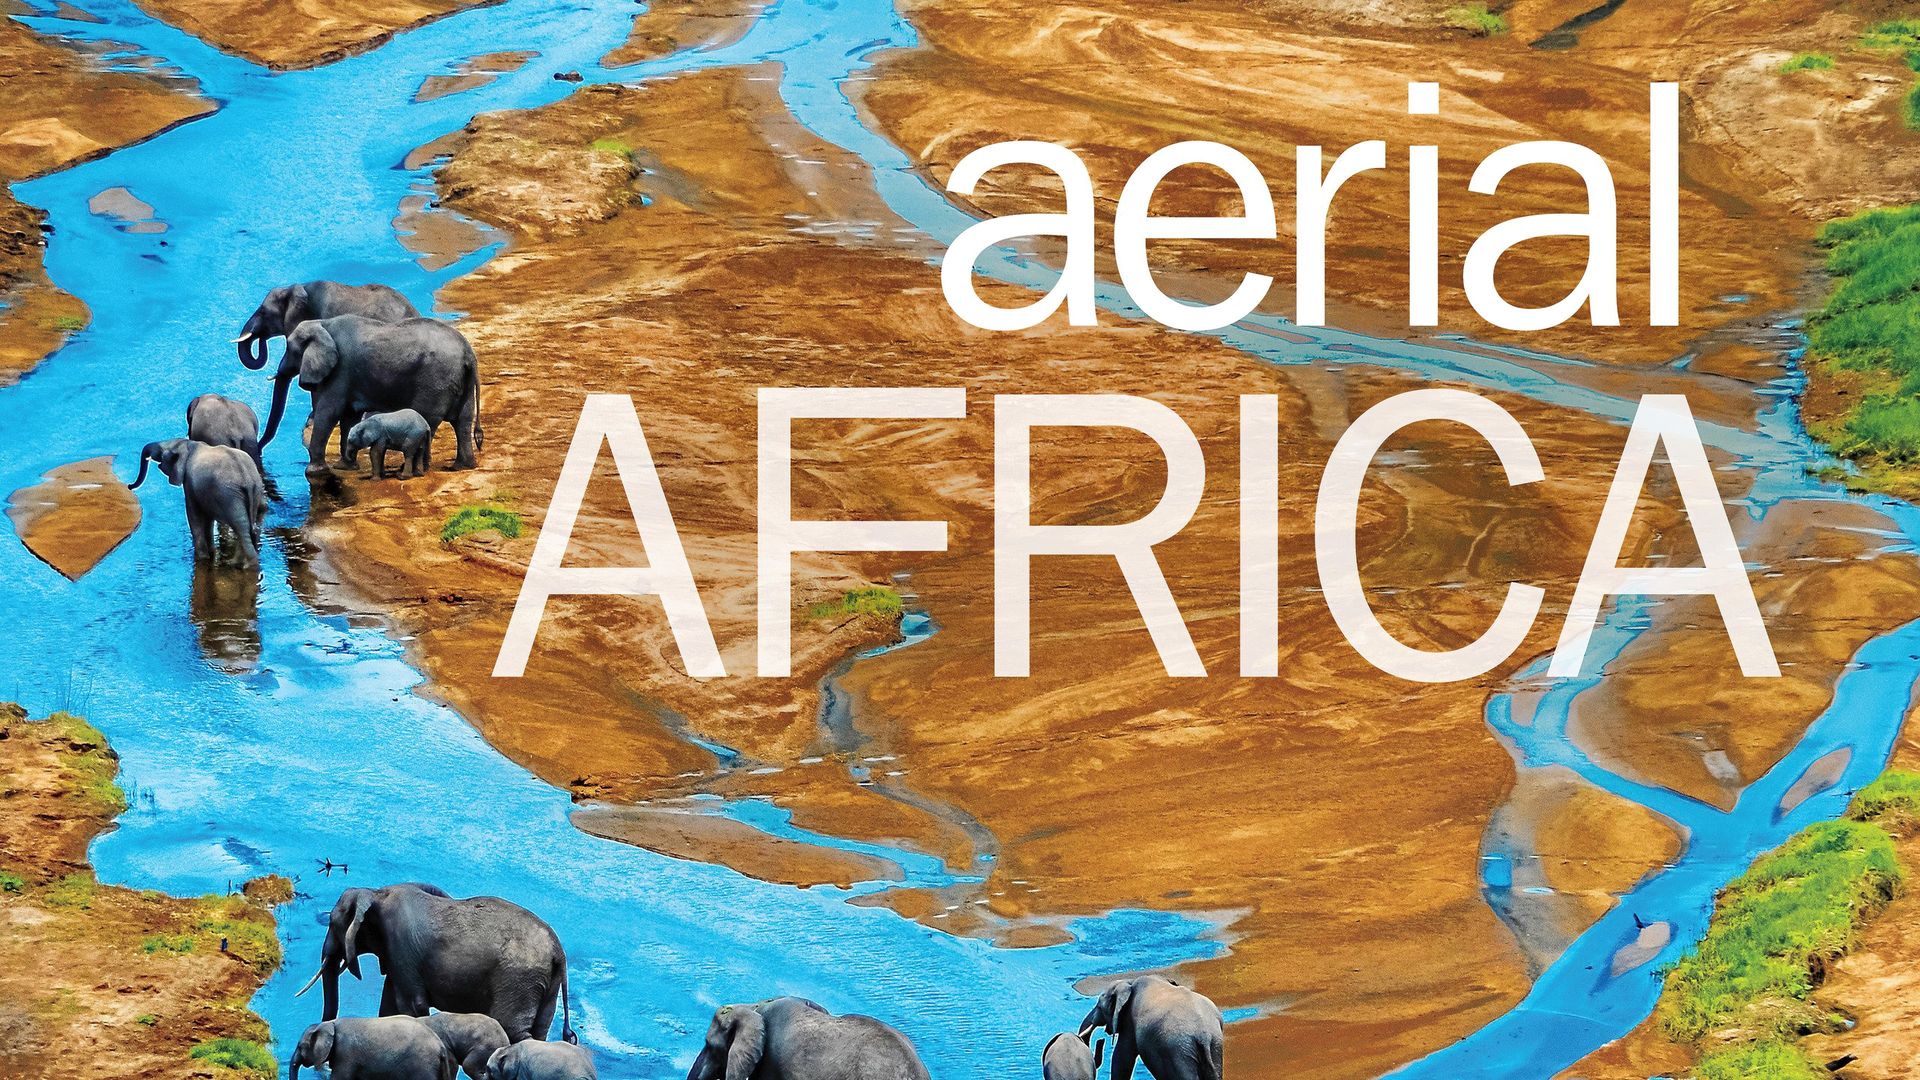 Aerial Africa background